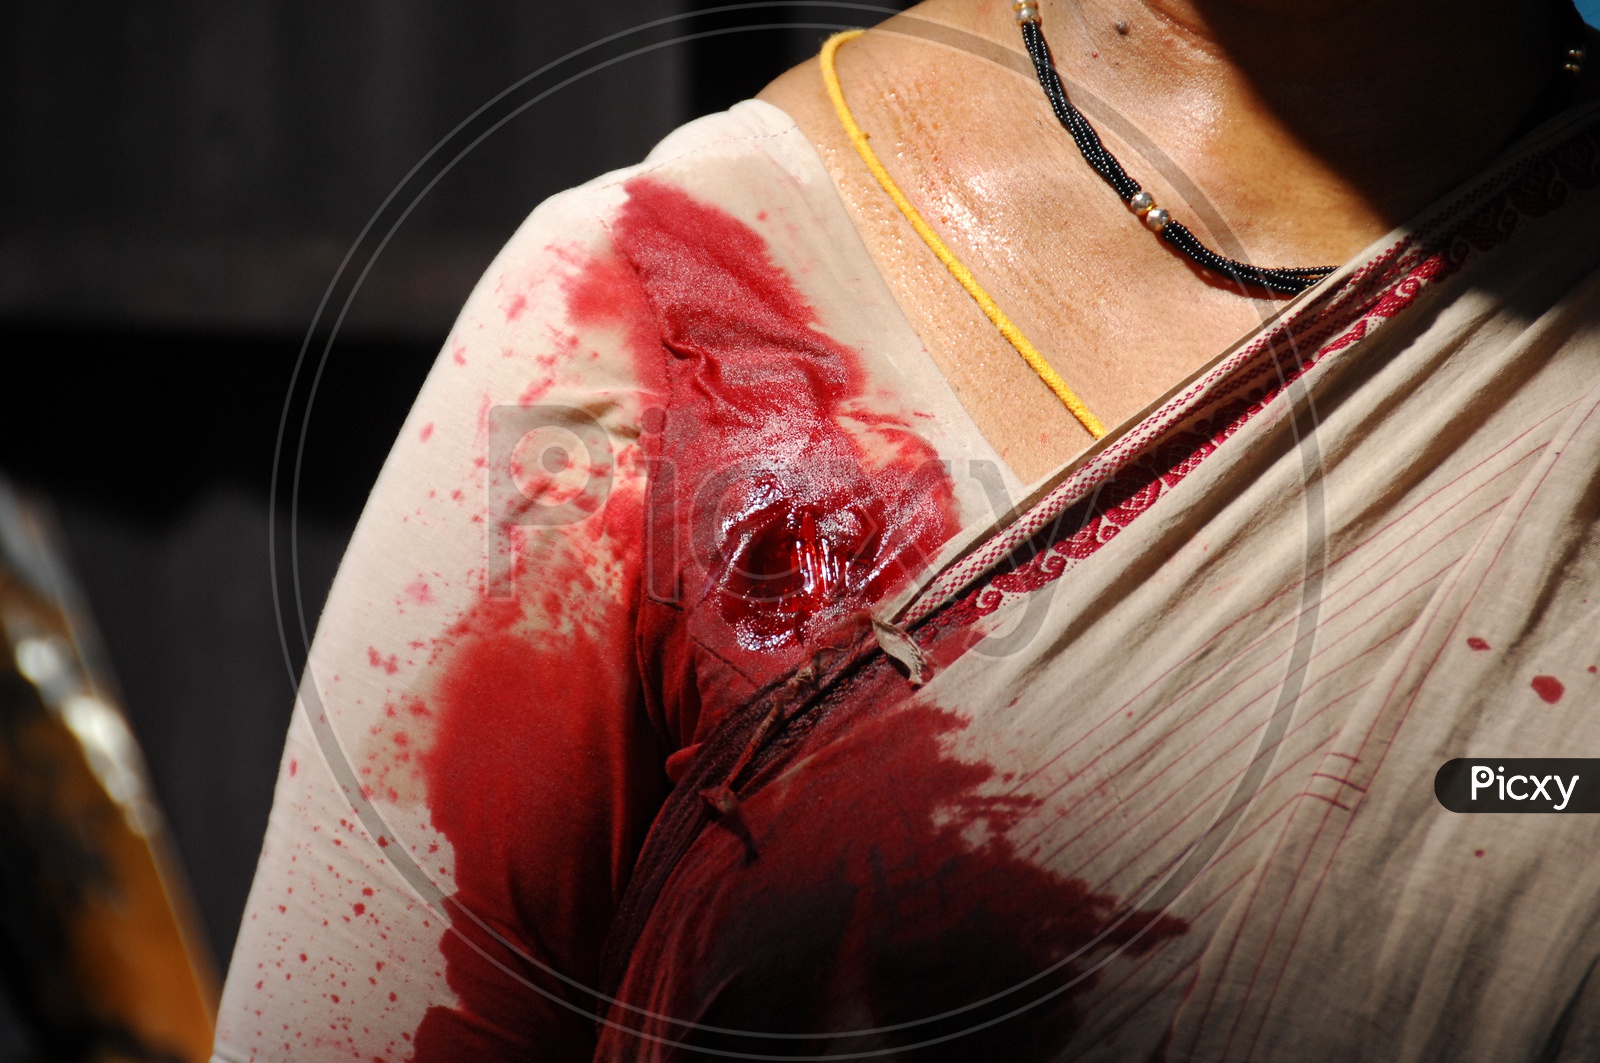 A woman with blood injury